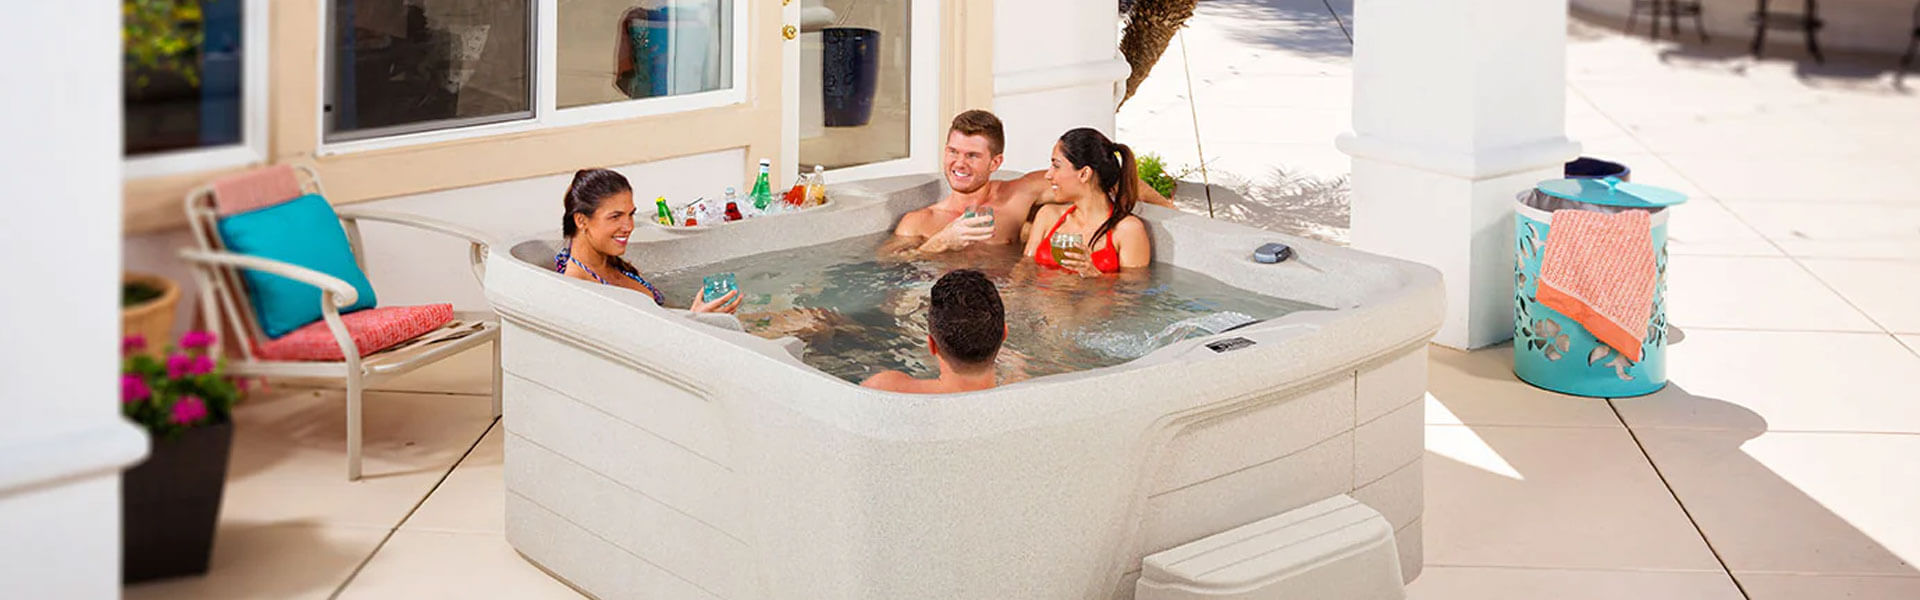 Top 5 Reasons To Own A Hot Tub